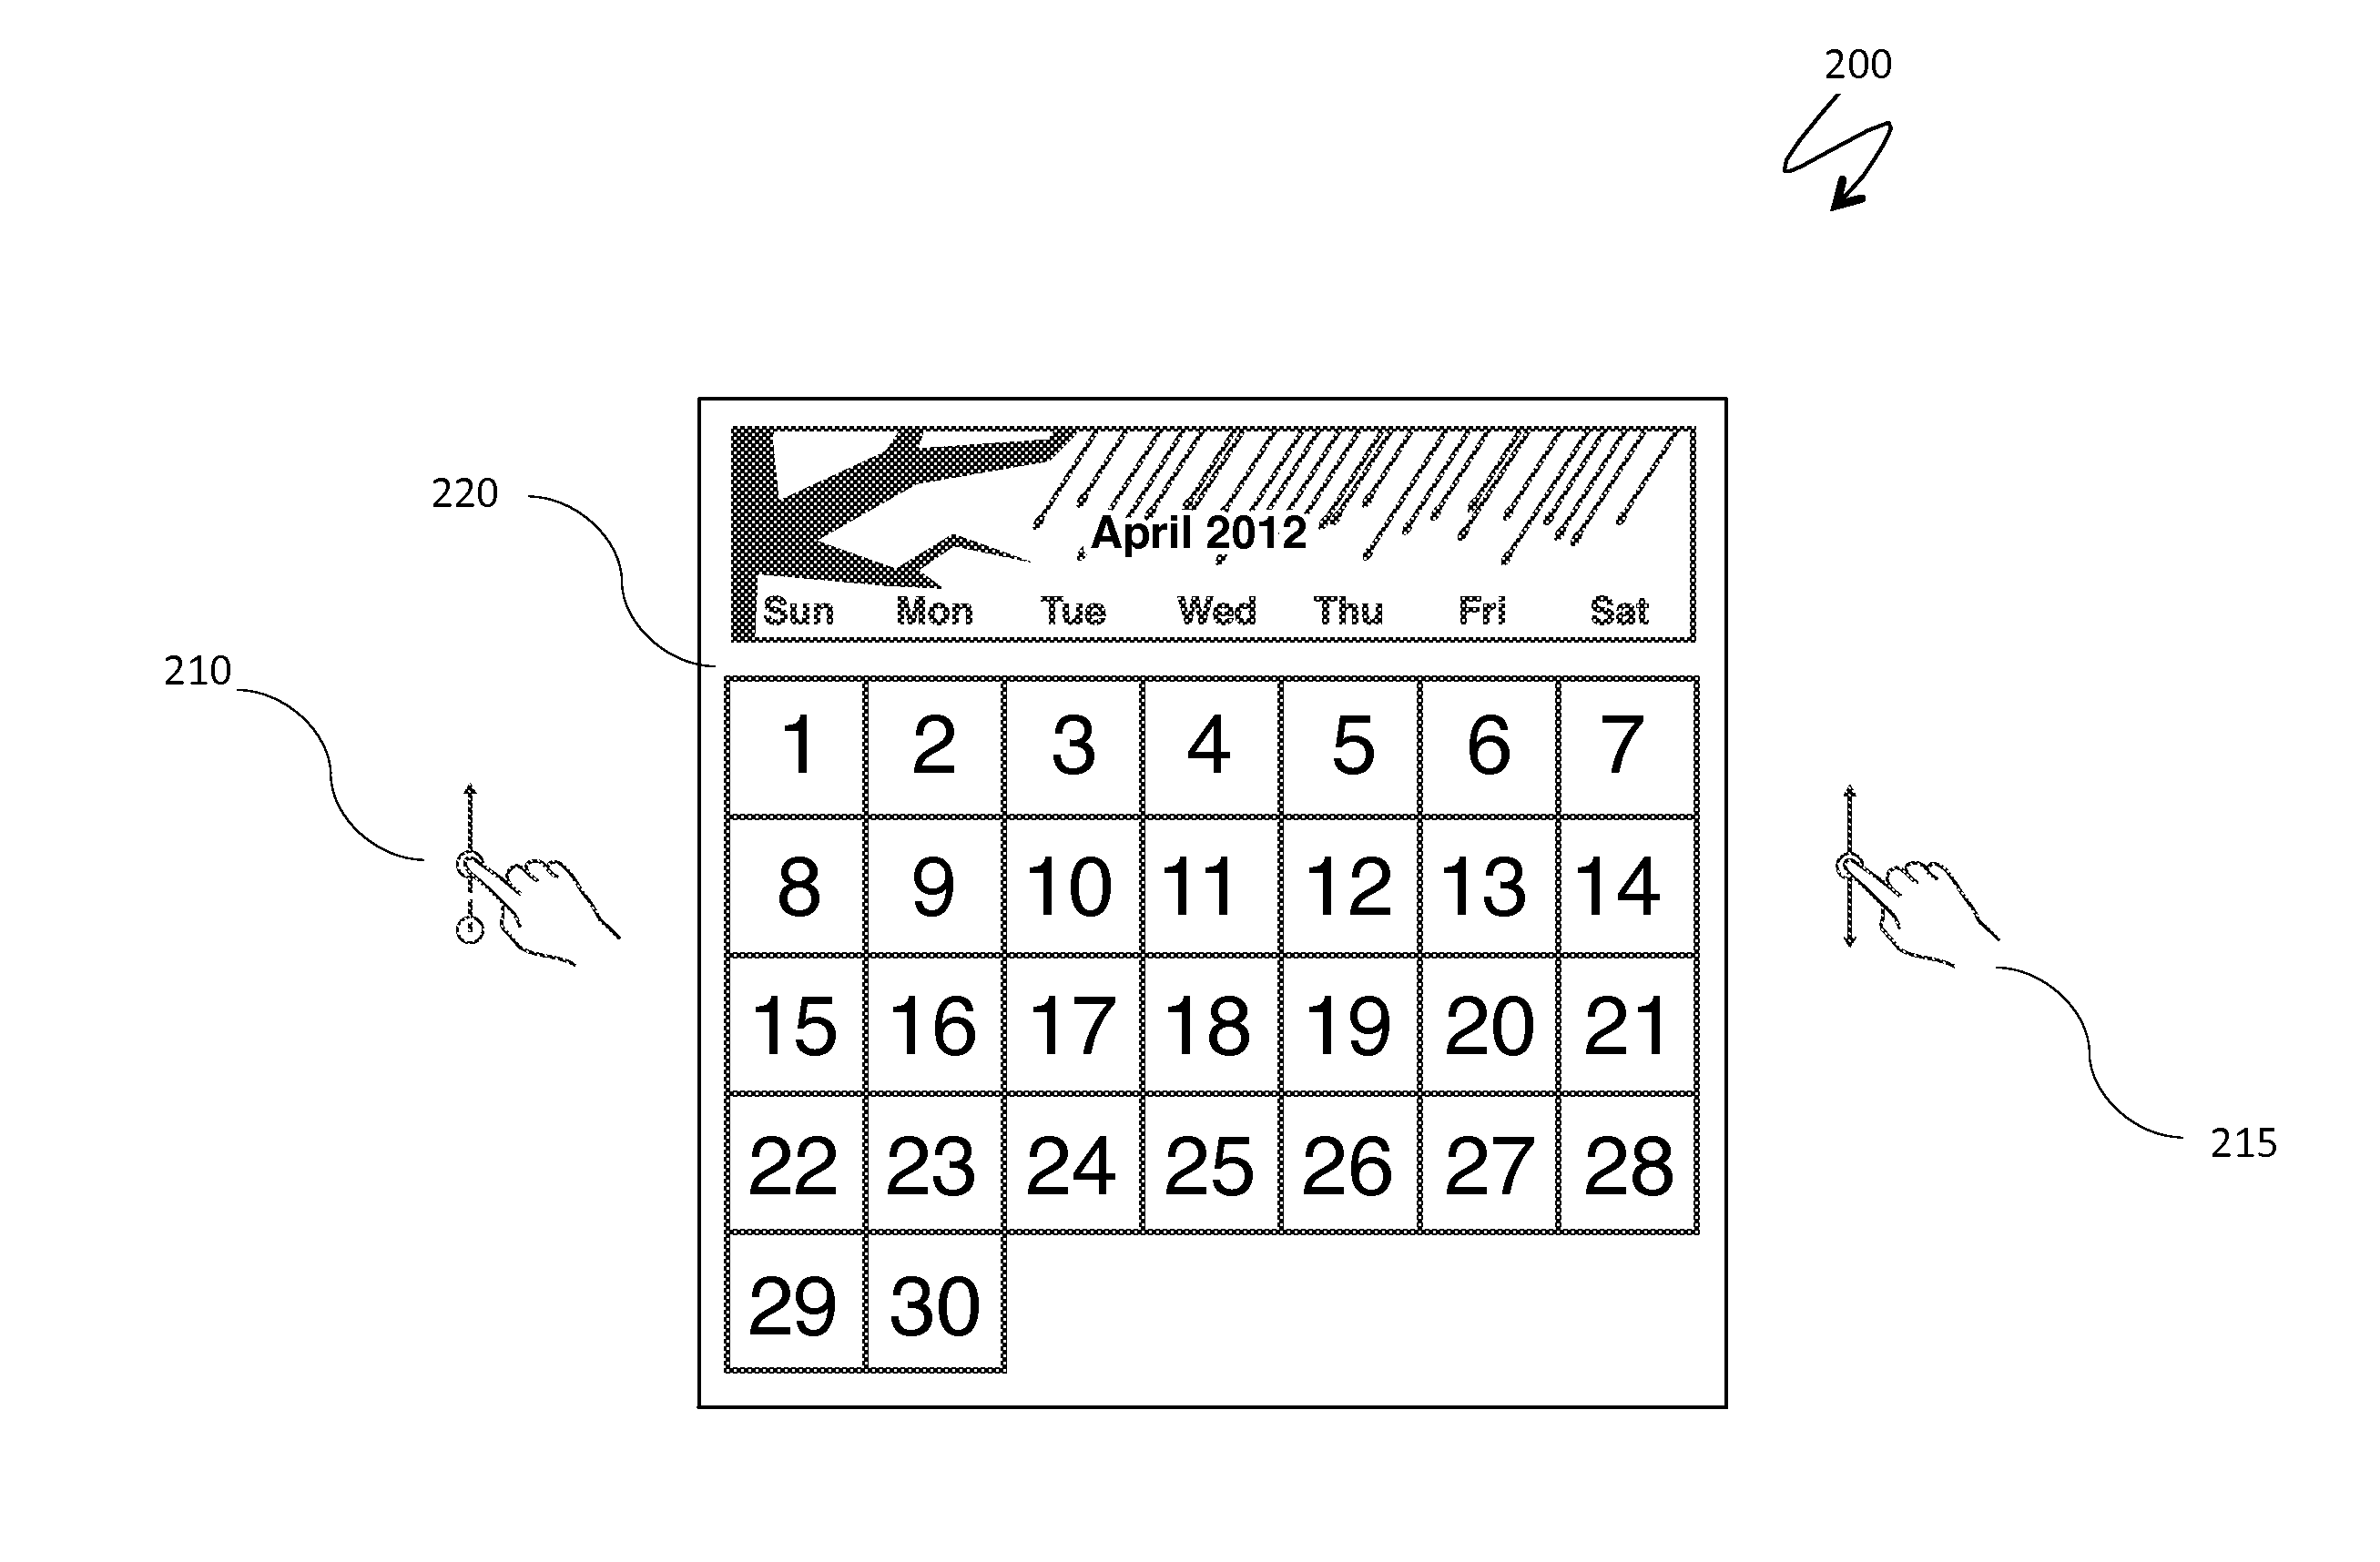 Scrollable calendar with combined date and time controls